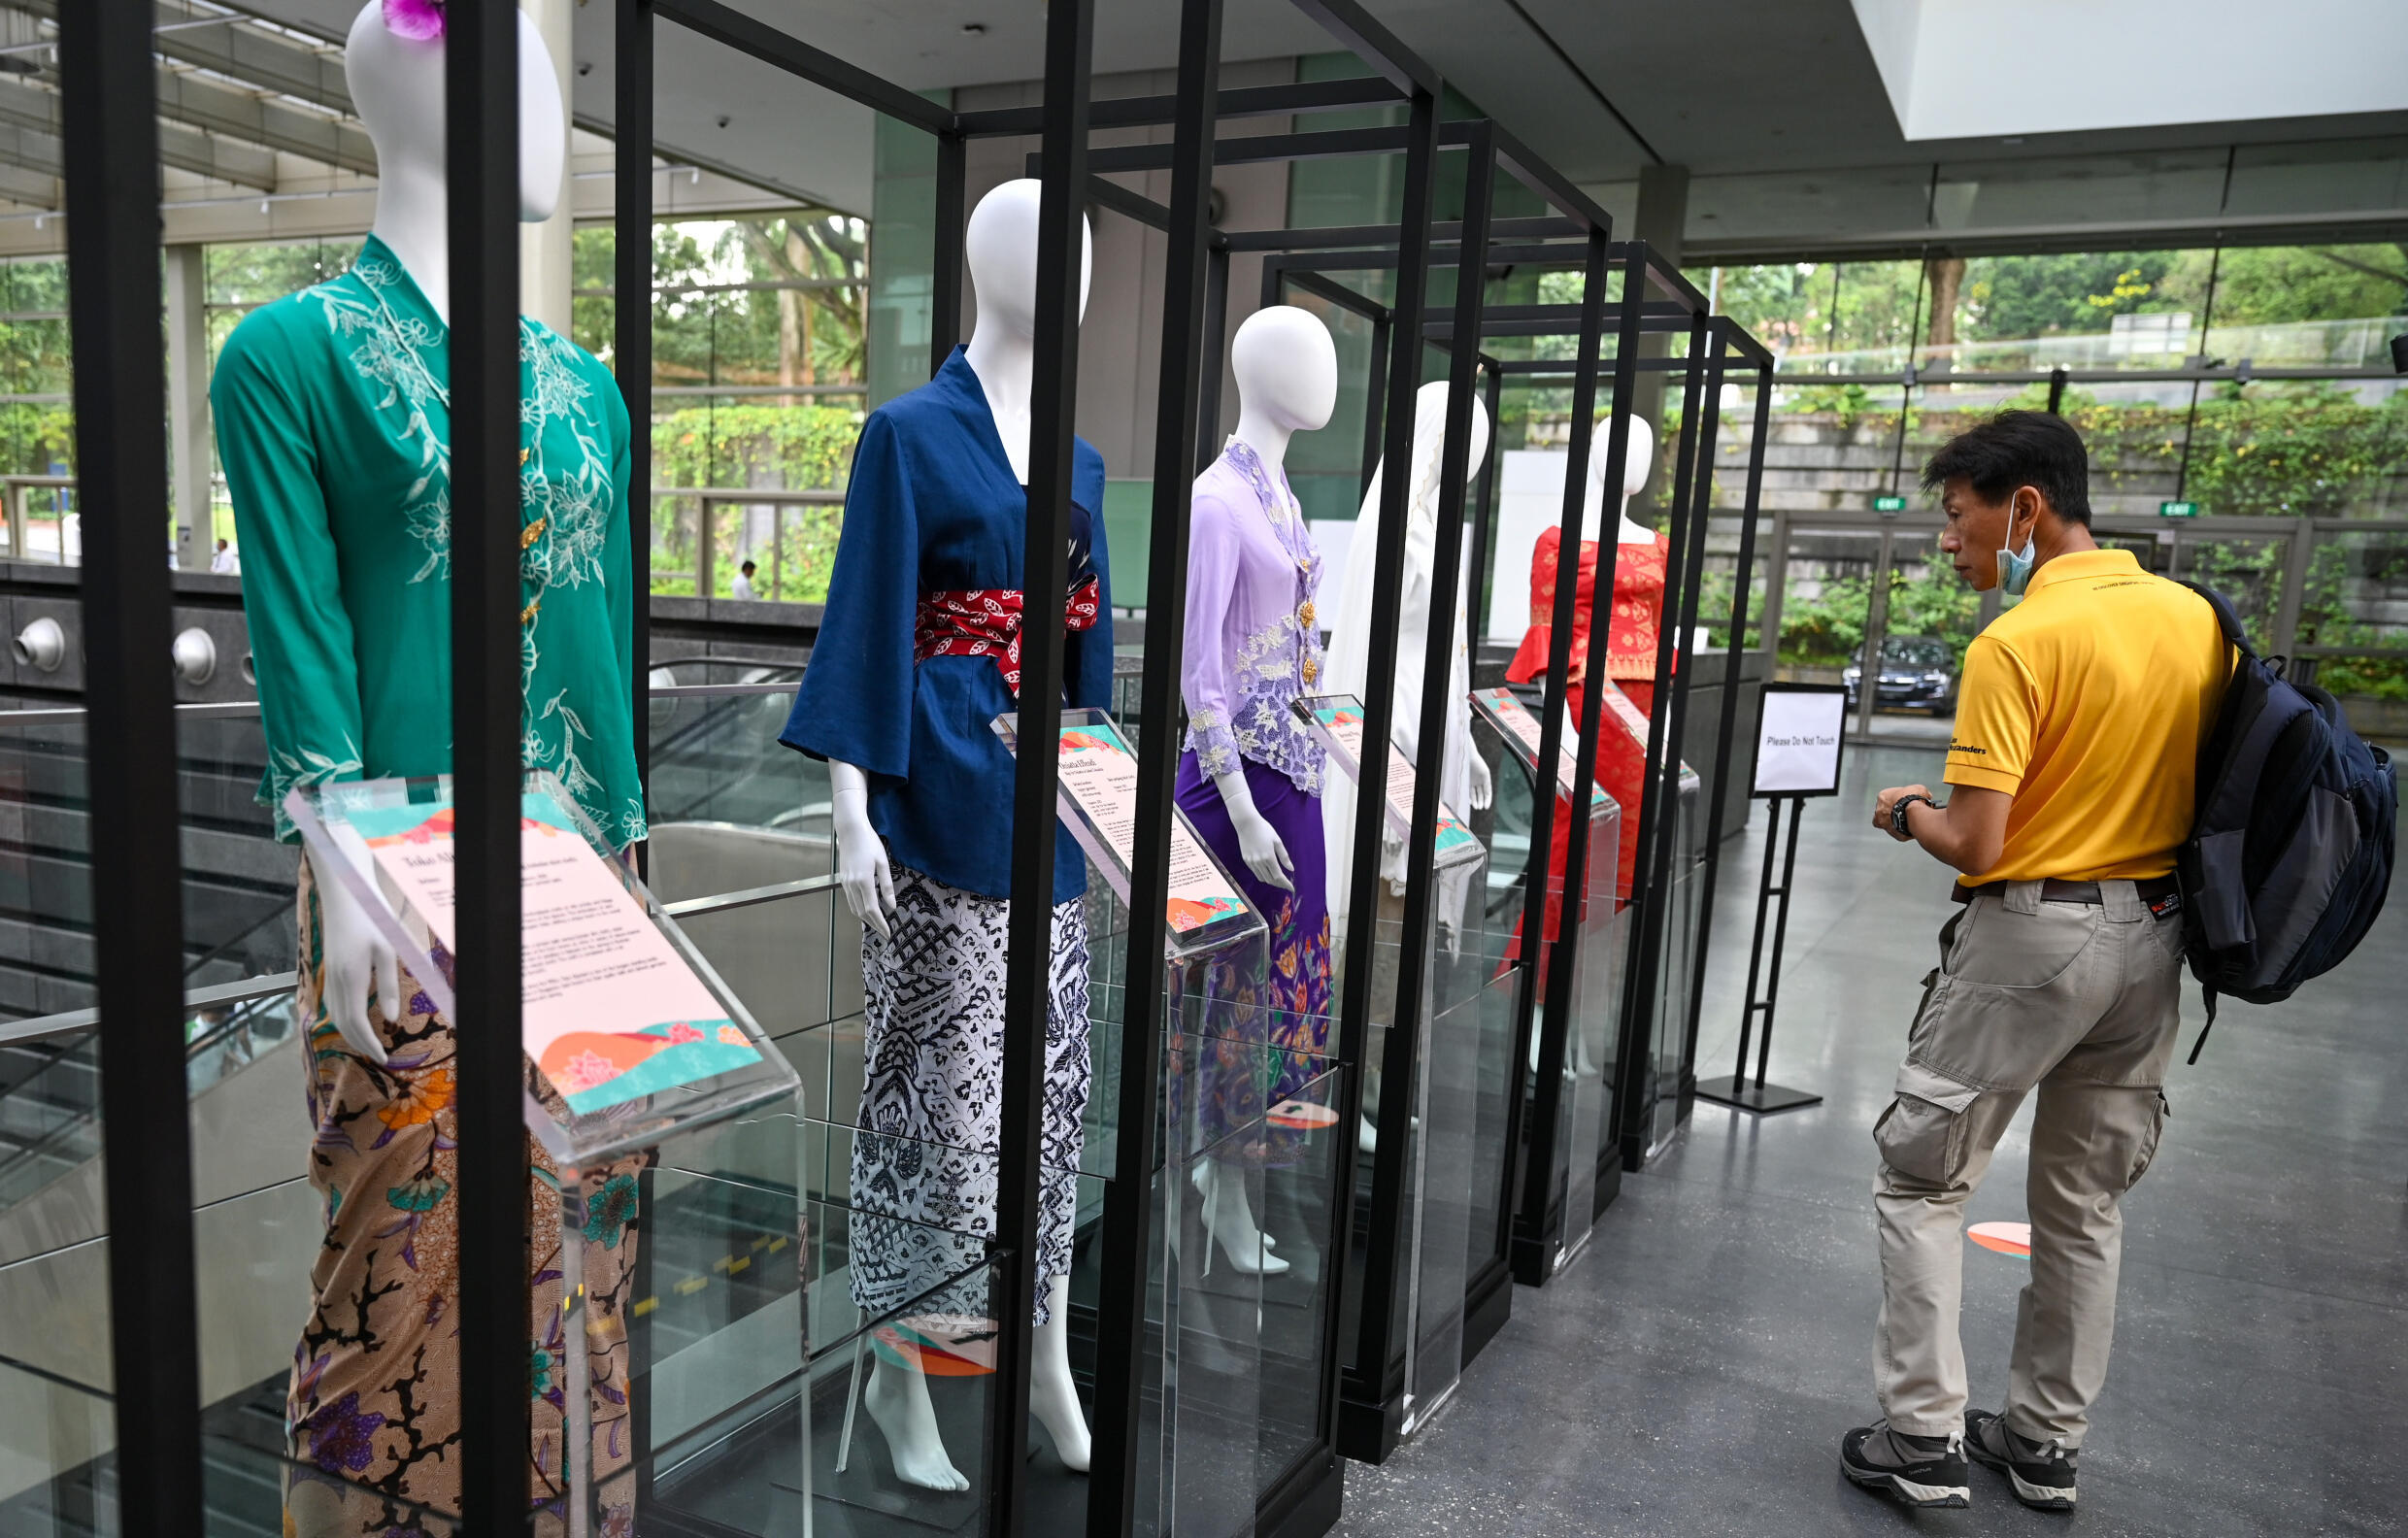 A man looks at displays of the kebaya, a traditional outfit worn by women in Southeast Asia, at the National Museum in Singapore on April 5, 2023. Photo: AFP